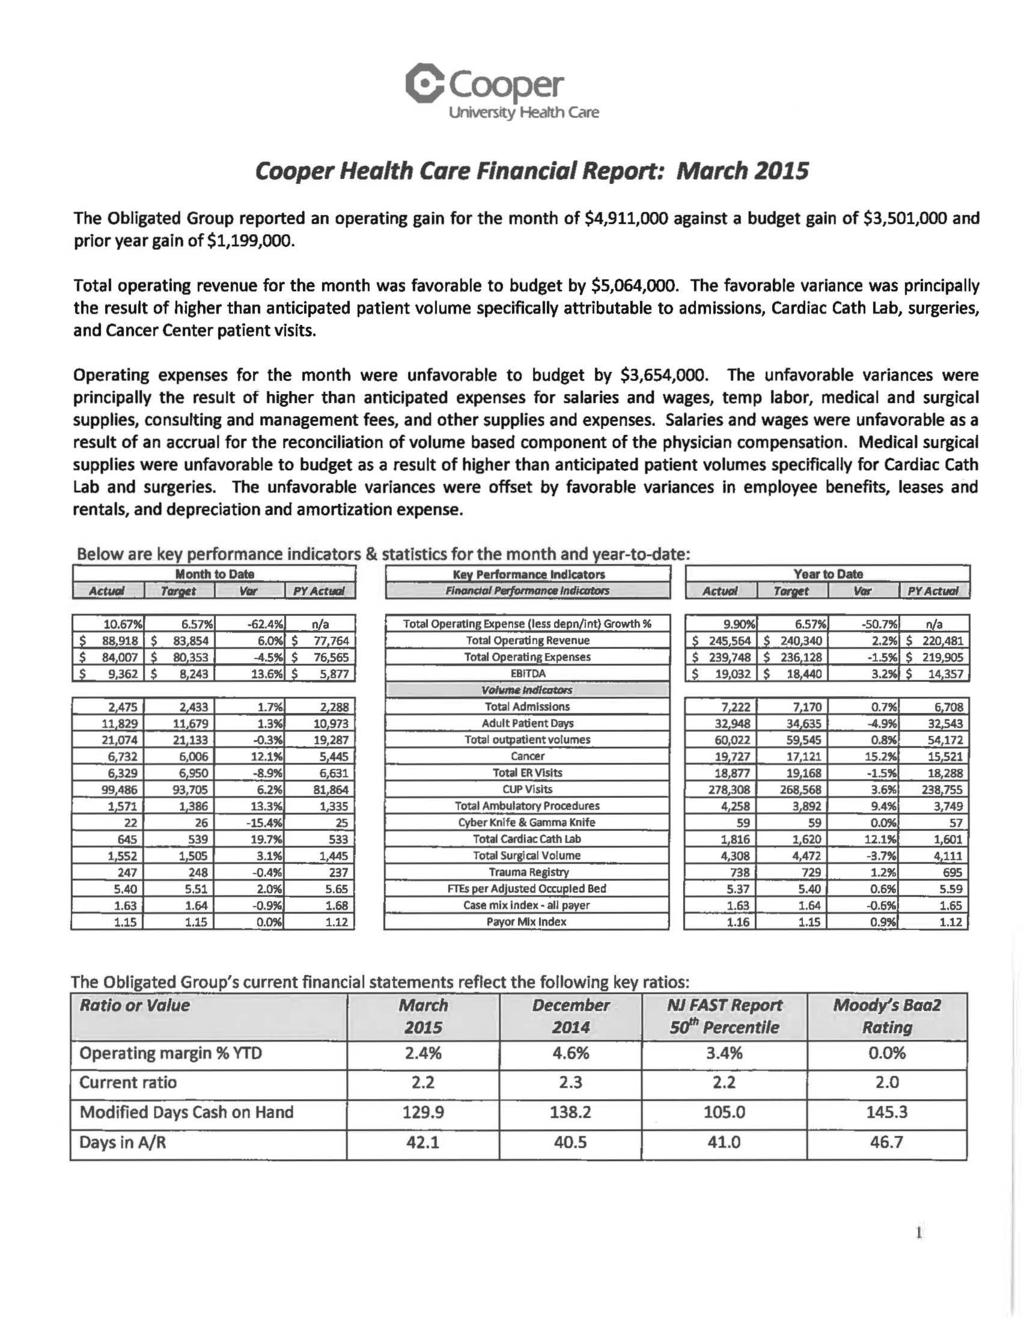 ecooper University Health care Cooper Health Care Financial Report: March 2015 The reported an operating gain for the month of $4,911,000 against a budget gain of $3,501,000 and prior year gain of